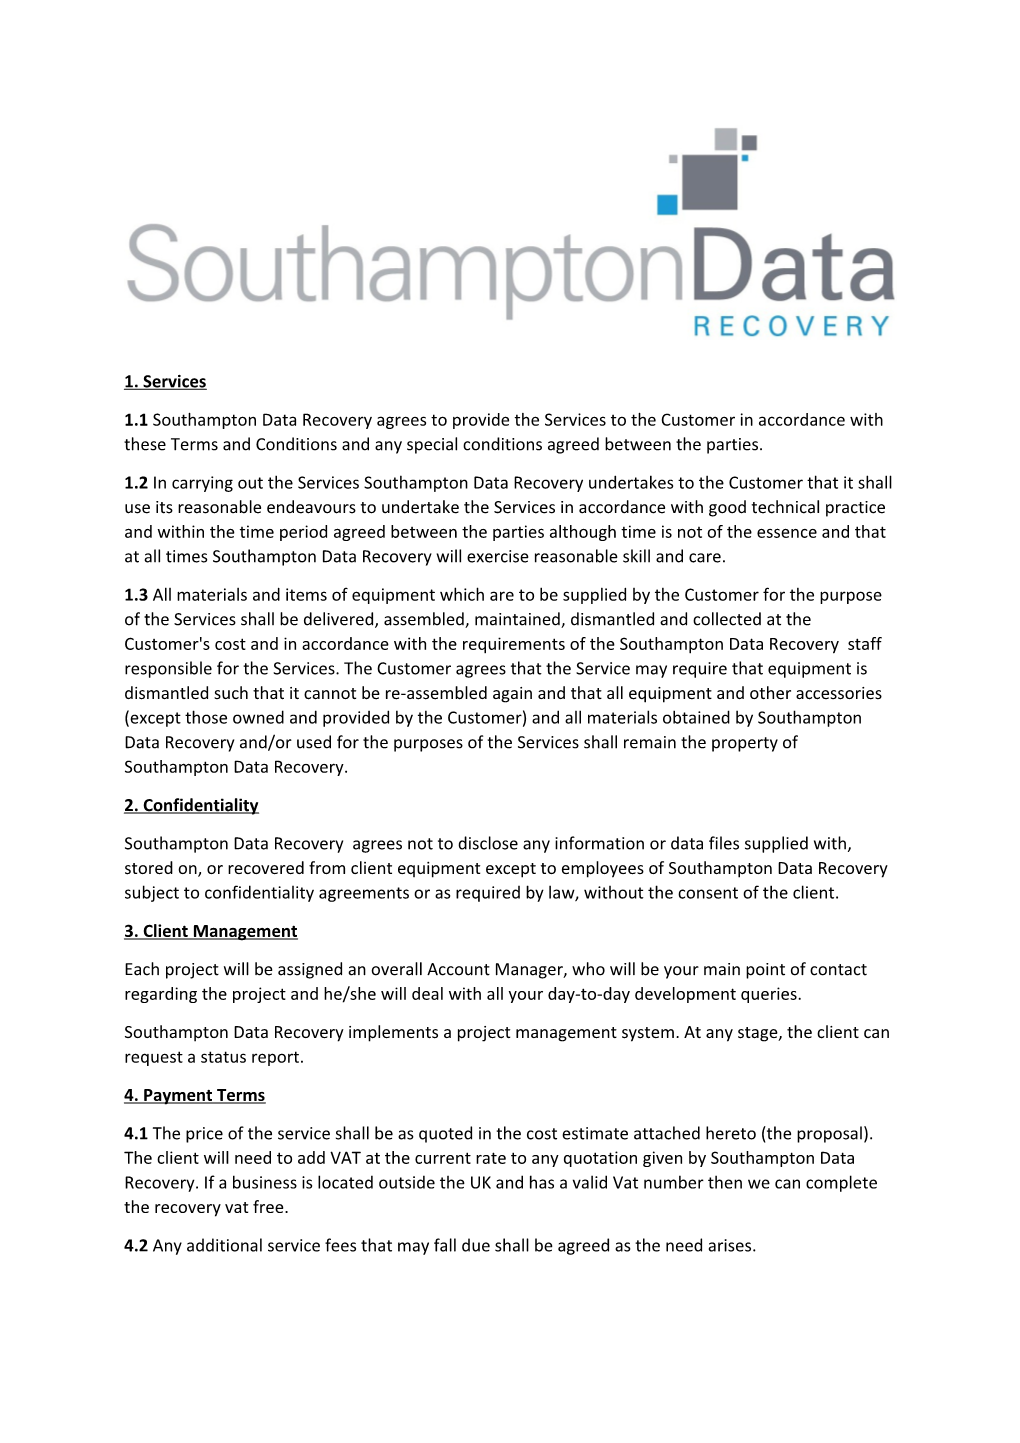 1.1Southampton Data Recovery Agrees to Provide the Services to the Customer in Accordance